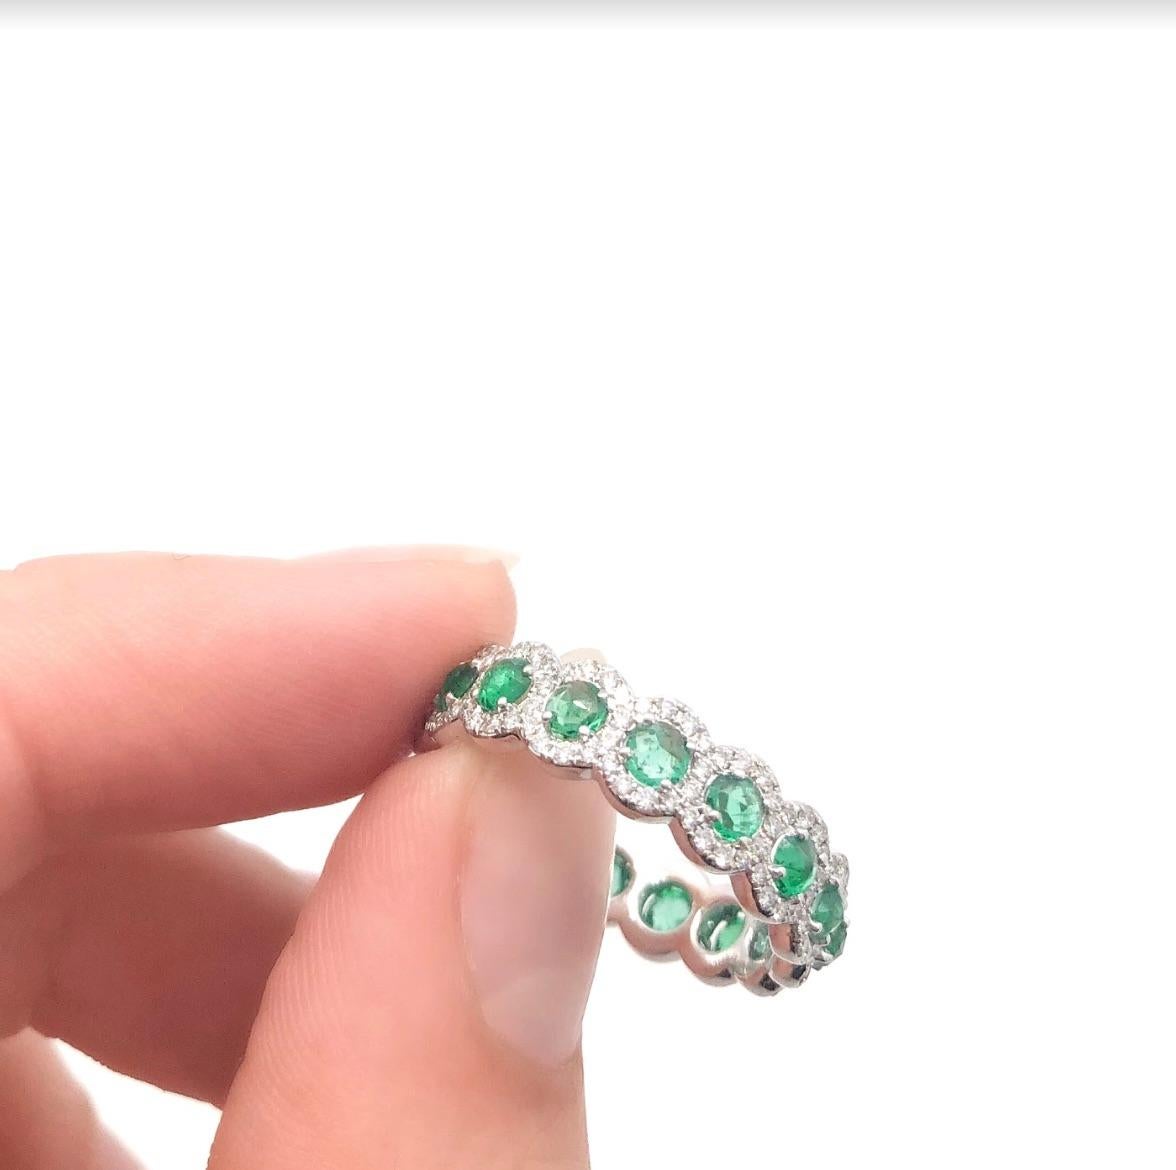 This stunning Emerald and Diamond Band from 64Facets' Elements collection embodies the light and delicate aesthetic that defines our designs. Our classic Scallop band is rendered even more spectacular with the addition of radiant rose-cut gemstones,